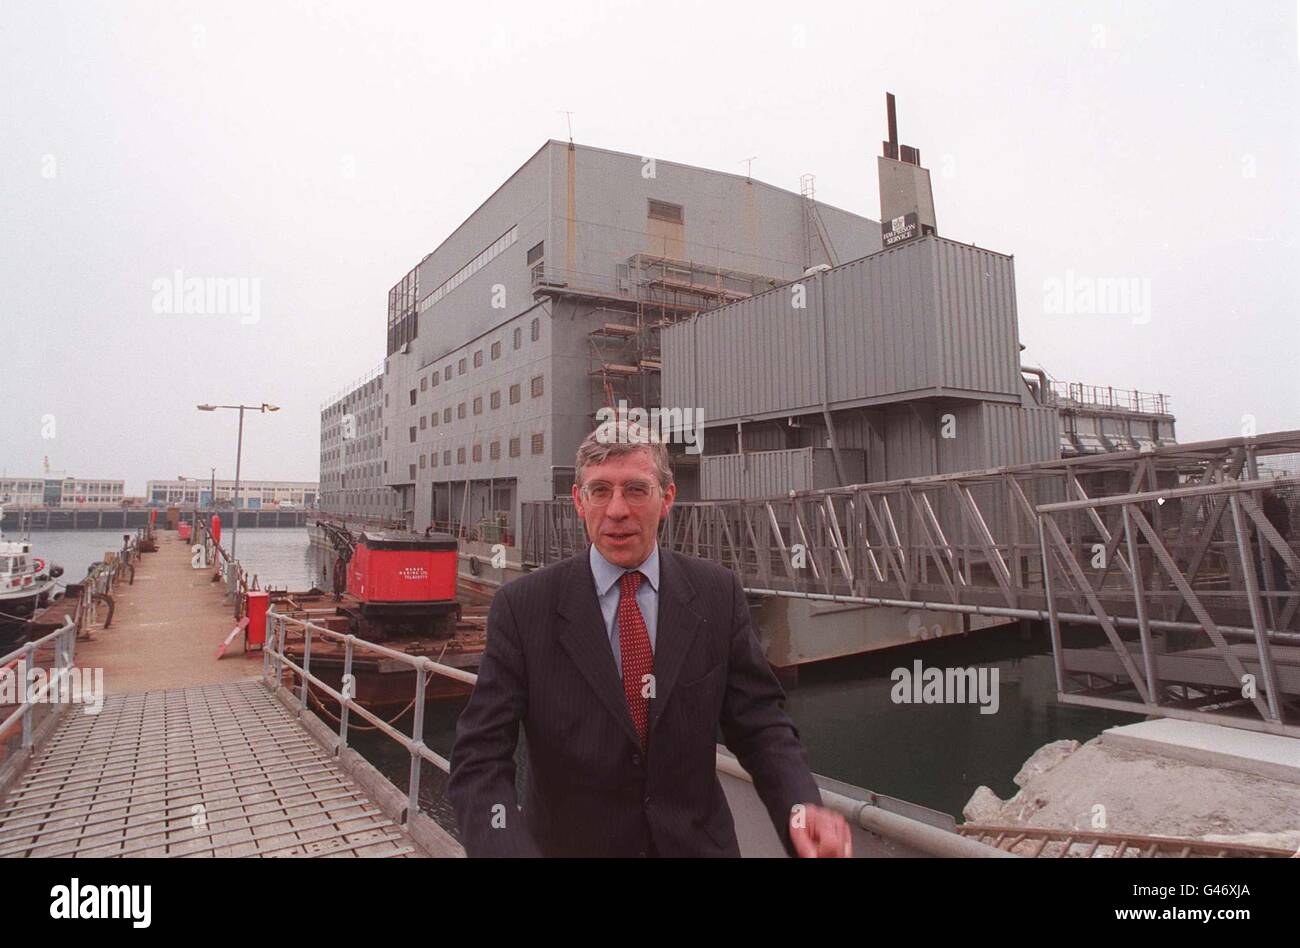 Home Secretary Jack Straw during a visit to HMP Weare this afternoon (Friday), the prison ship moored at Portland harbour. Mr Straw said that although he had yet to take a final decision on its suitability, the alternative would probably be to house inmates in police cells which would almost certainly be unacceptable. See PA Story PRISON Ship. (Independent Pool pic). PA Photos. Stock Photo